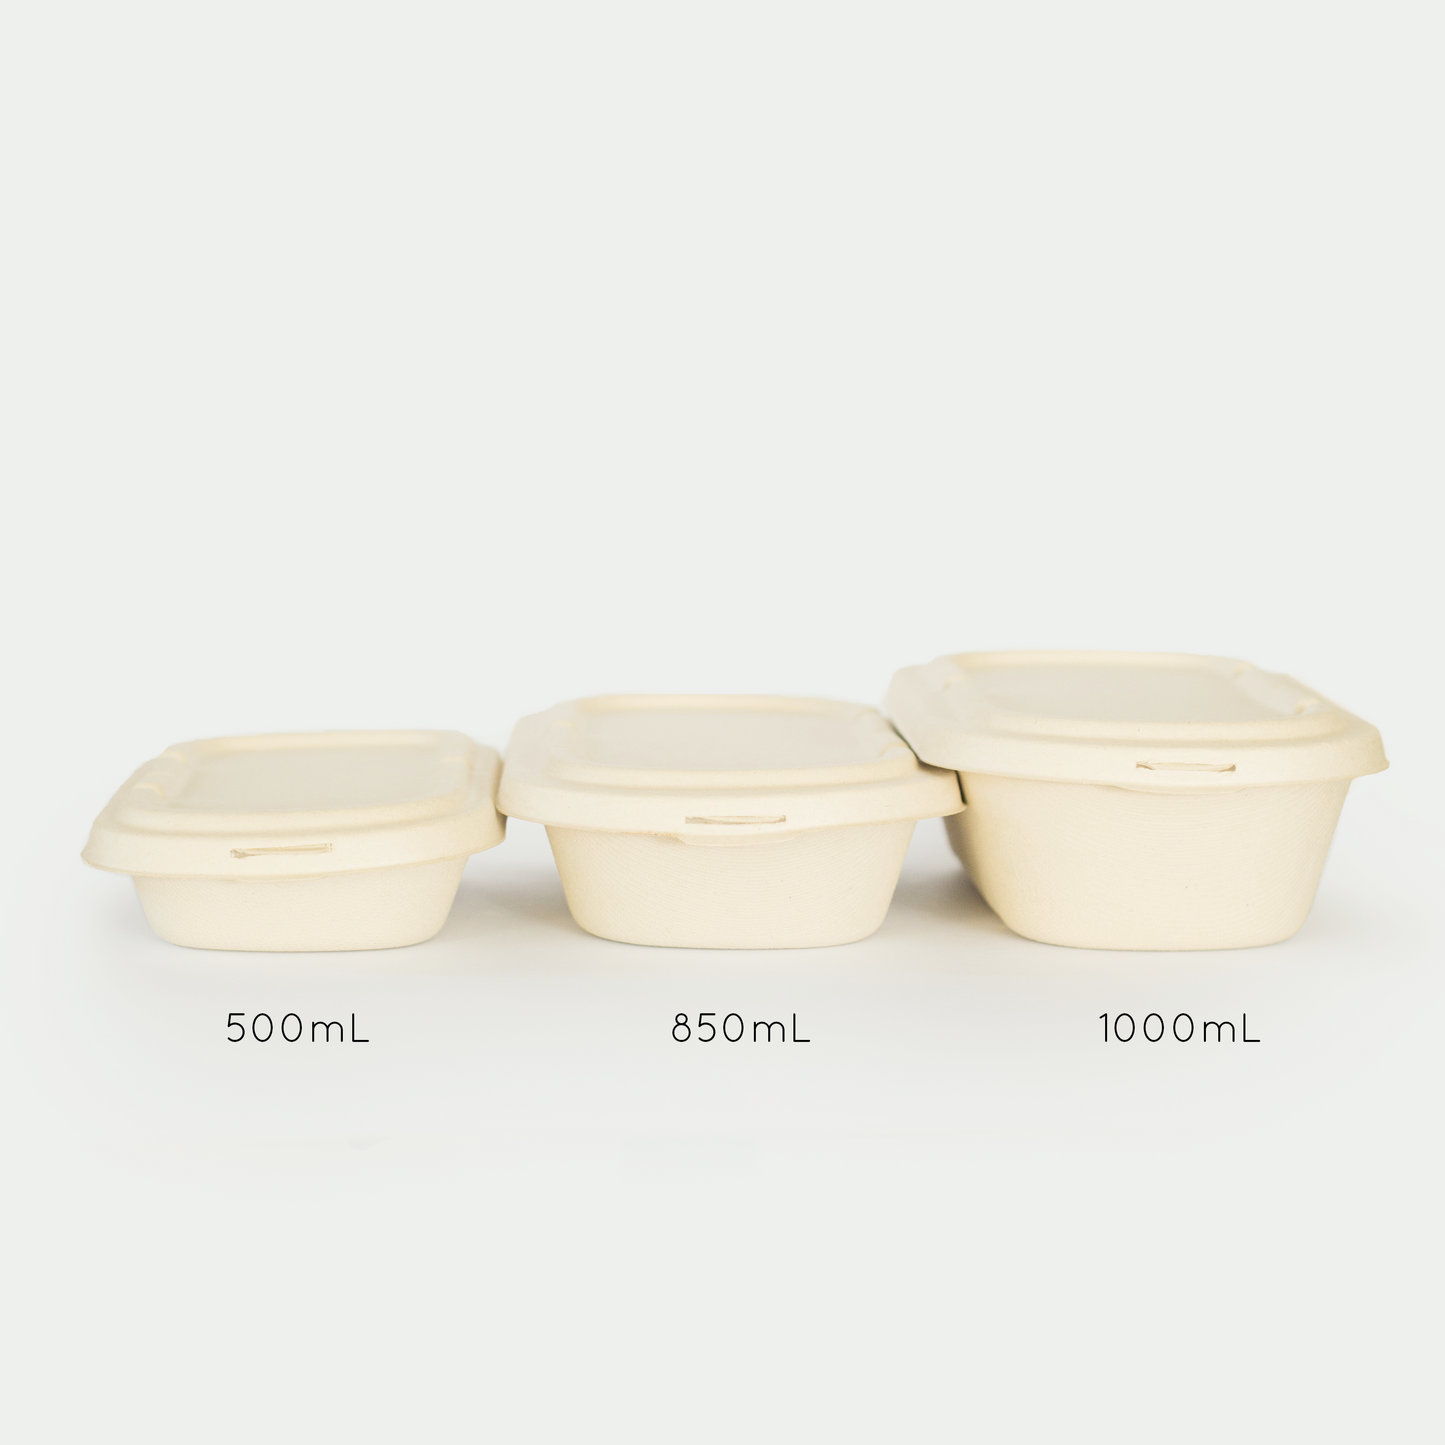 850mL Oval Bowl - Sugarcane Bagasse Food Container